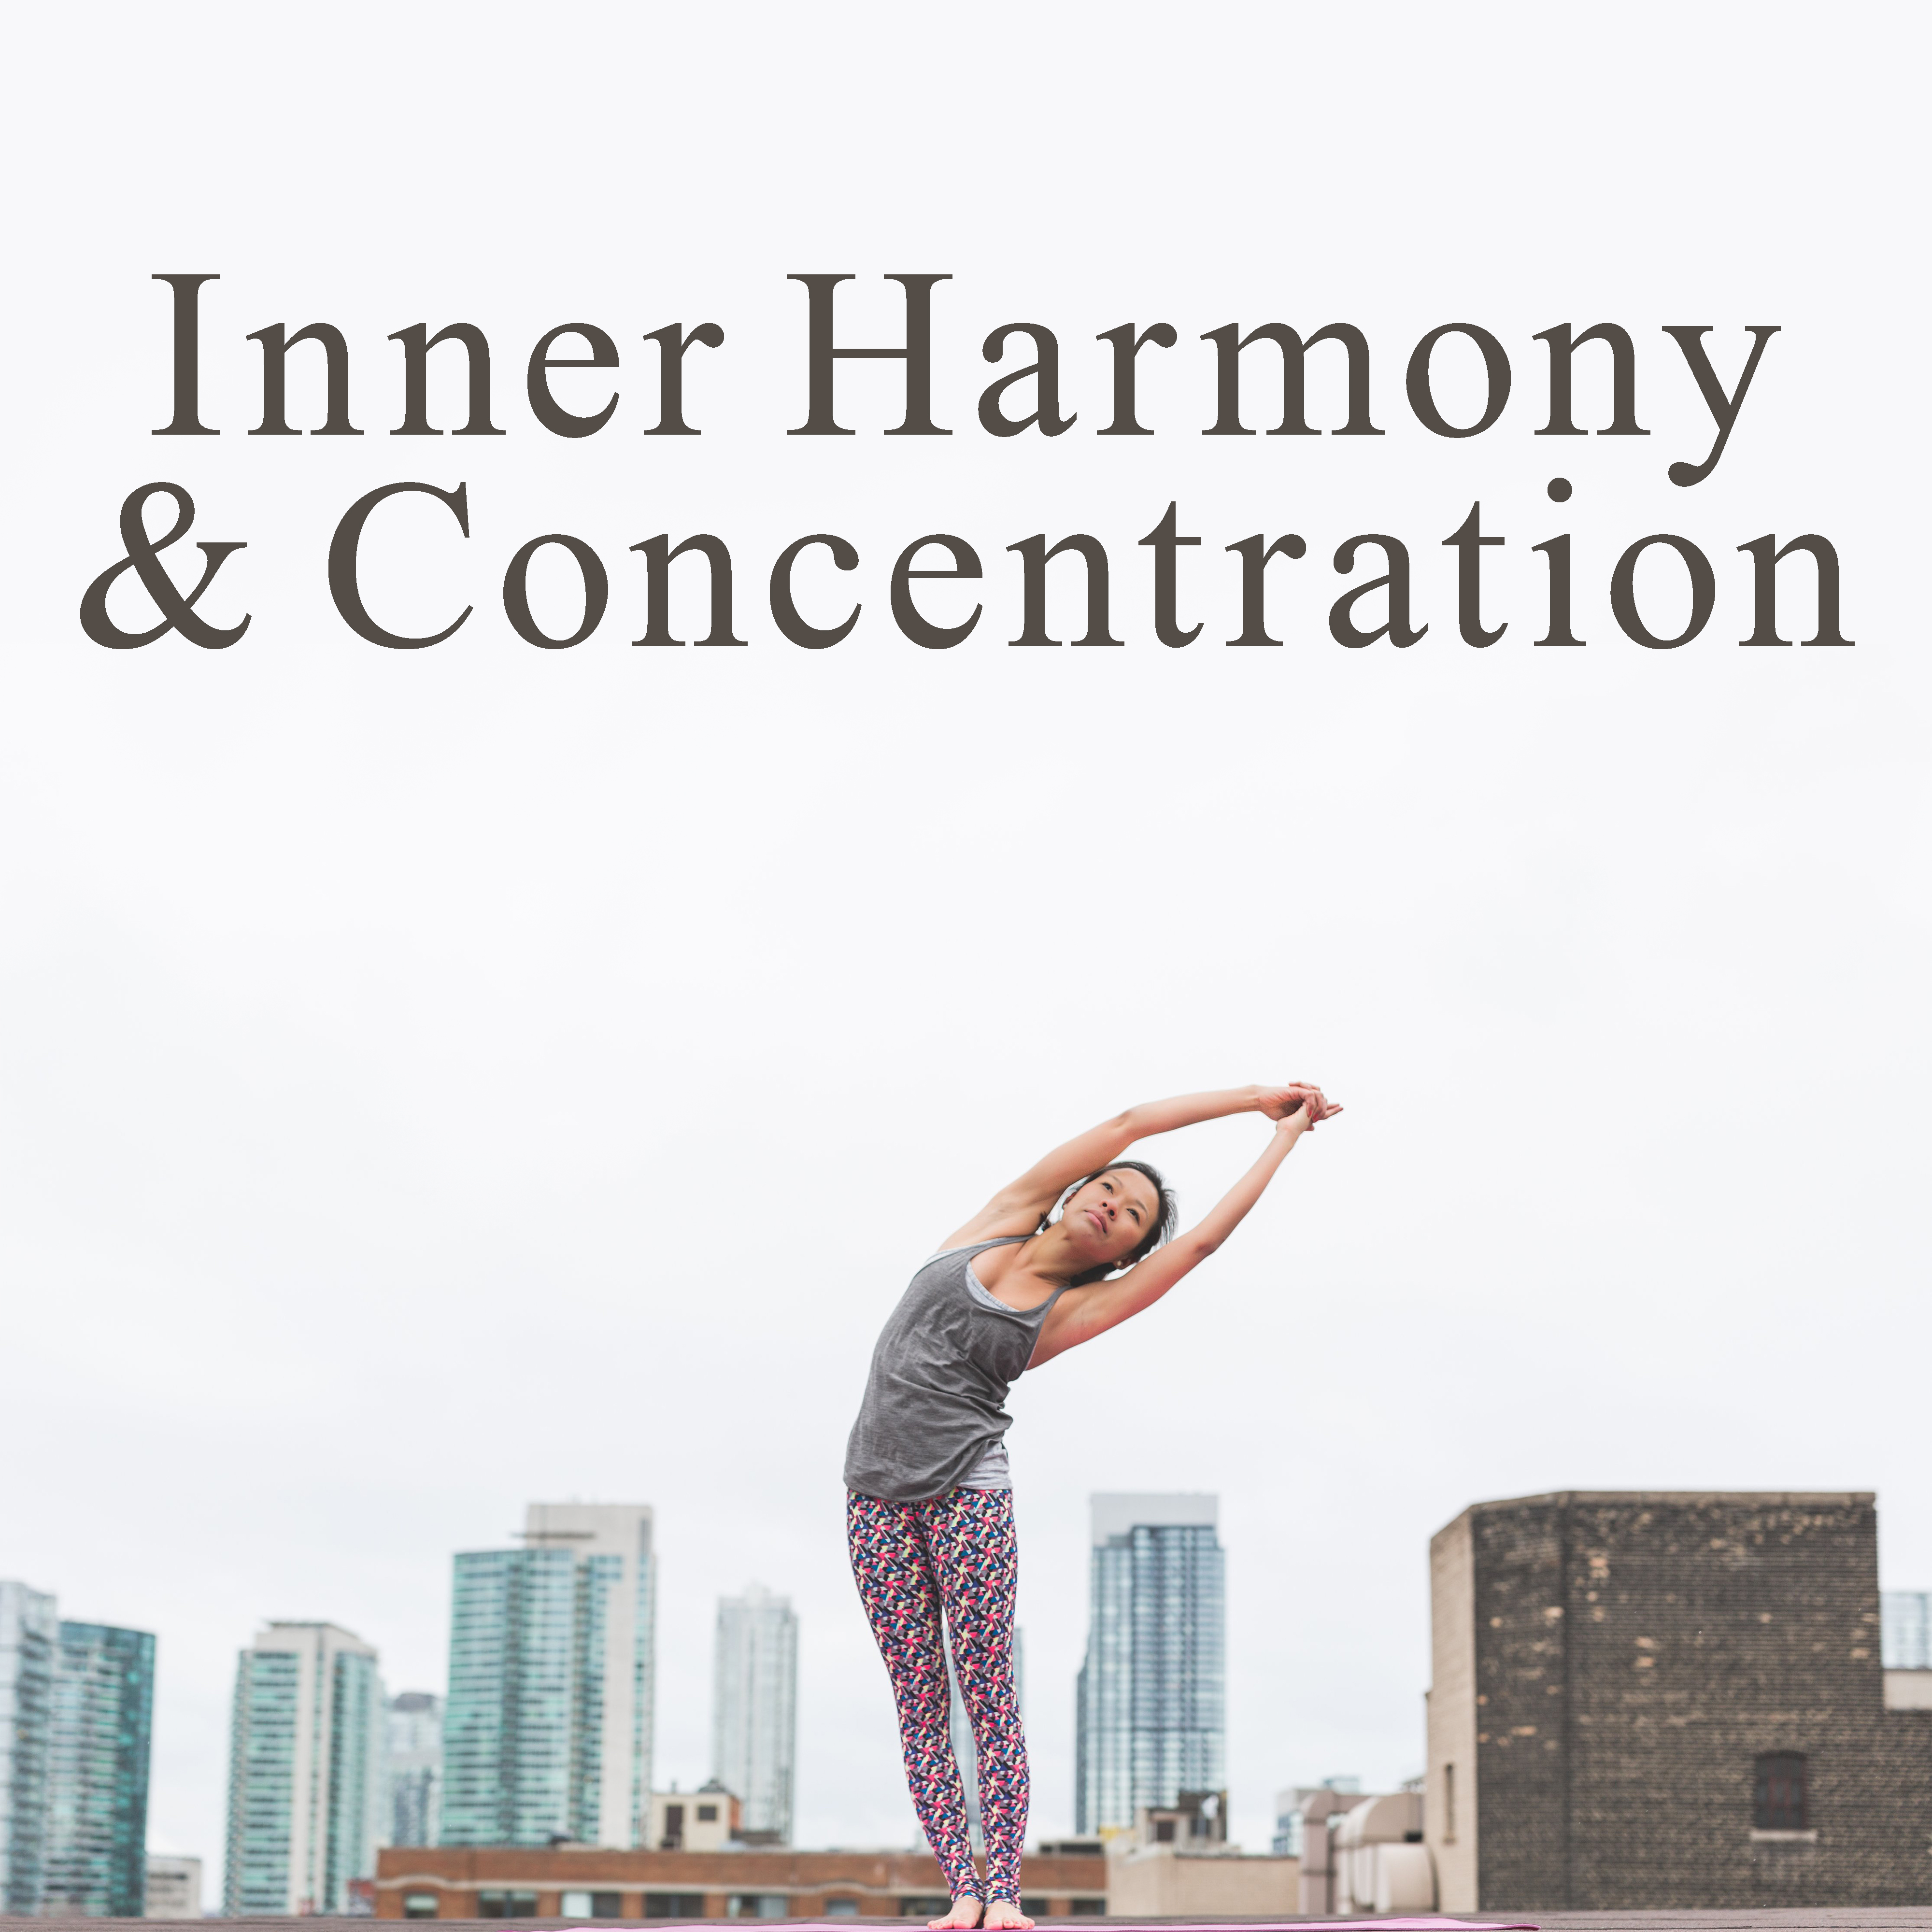 Inner Harmony  Concentration  Music for Meditation, Yoga, Healing, Asian Zen, Relaxation, Hatha Yoga, Soothing Sounds, Calm Down